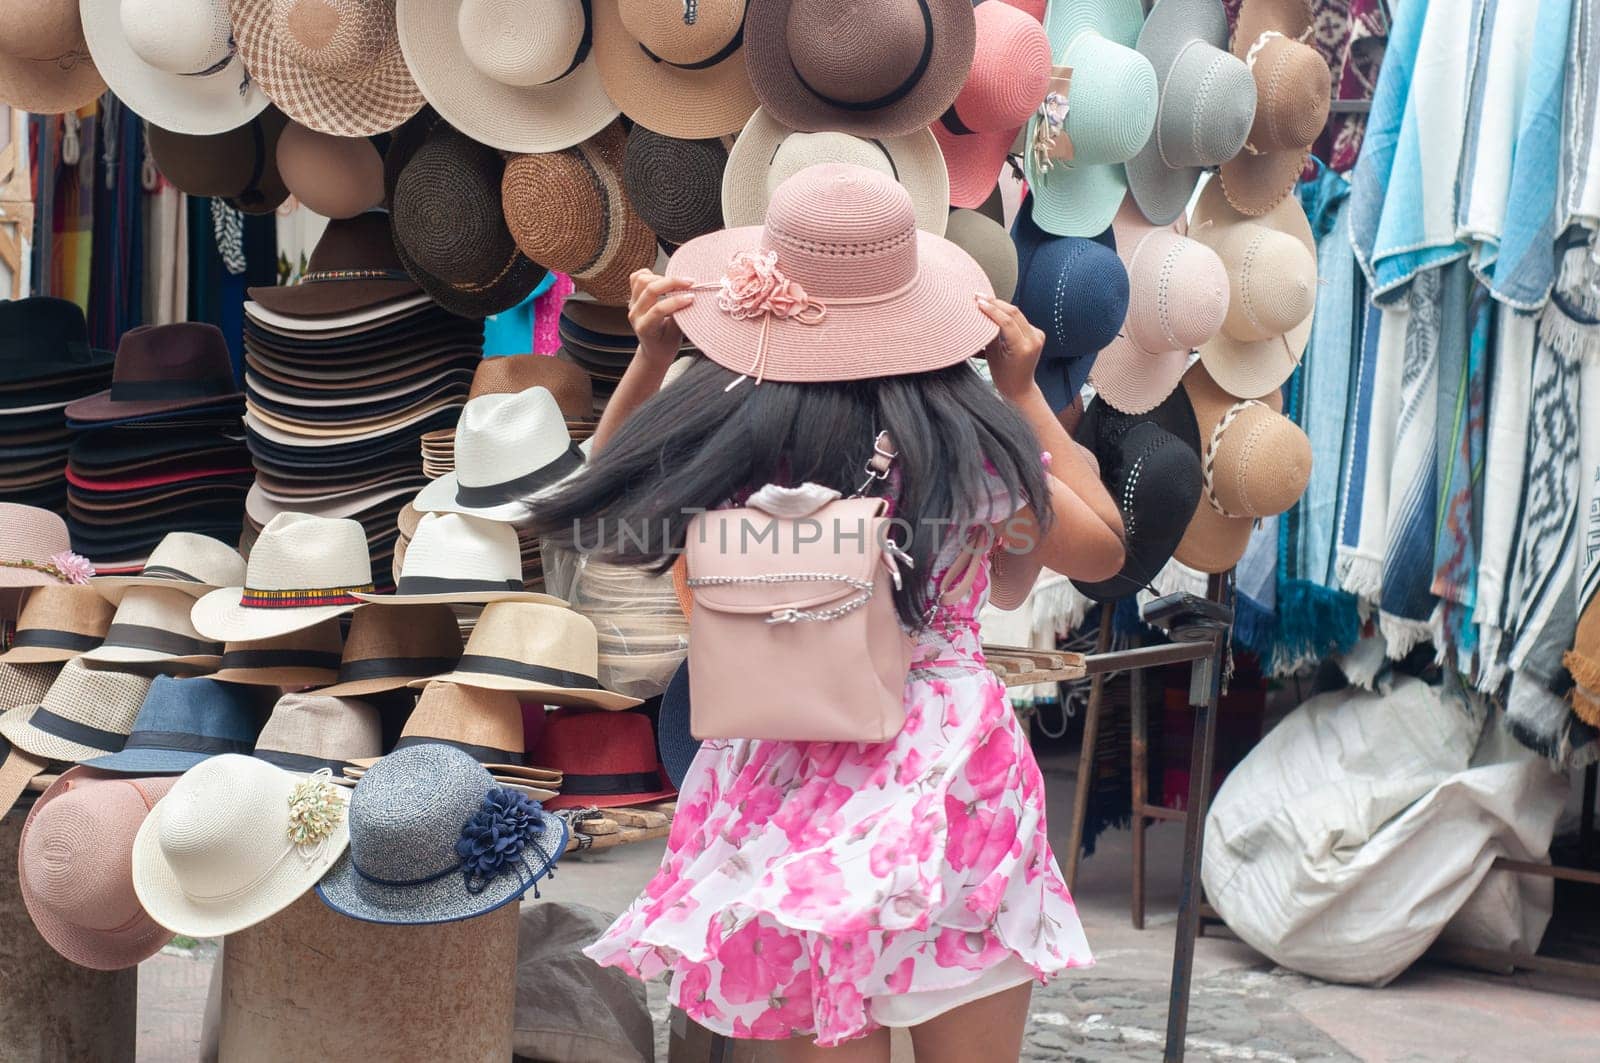 A young girl is seen from behind as she tries on a stylish pink hat amidst a vibrant display of various hats at an outdoor market stall. by Raulmartin